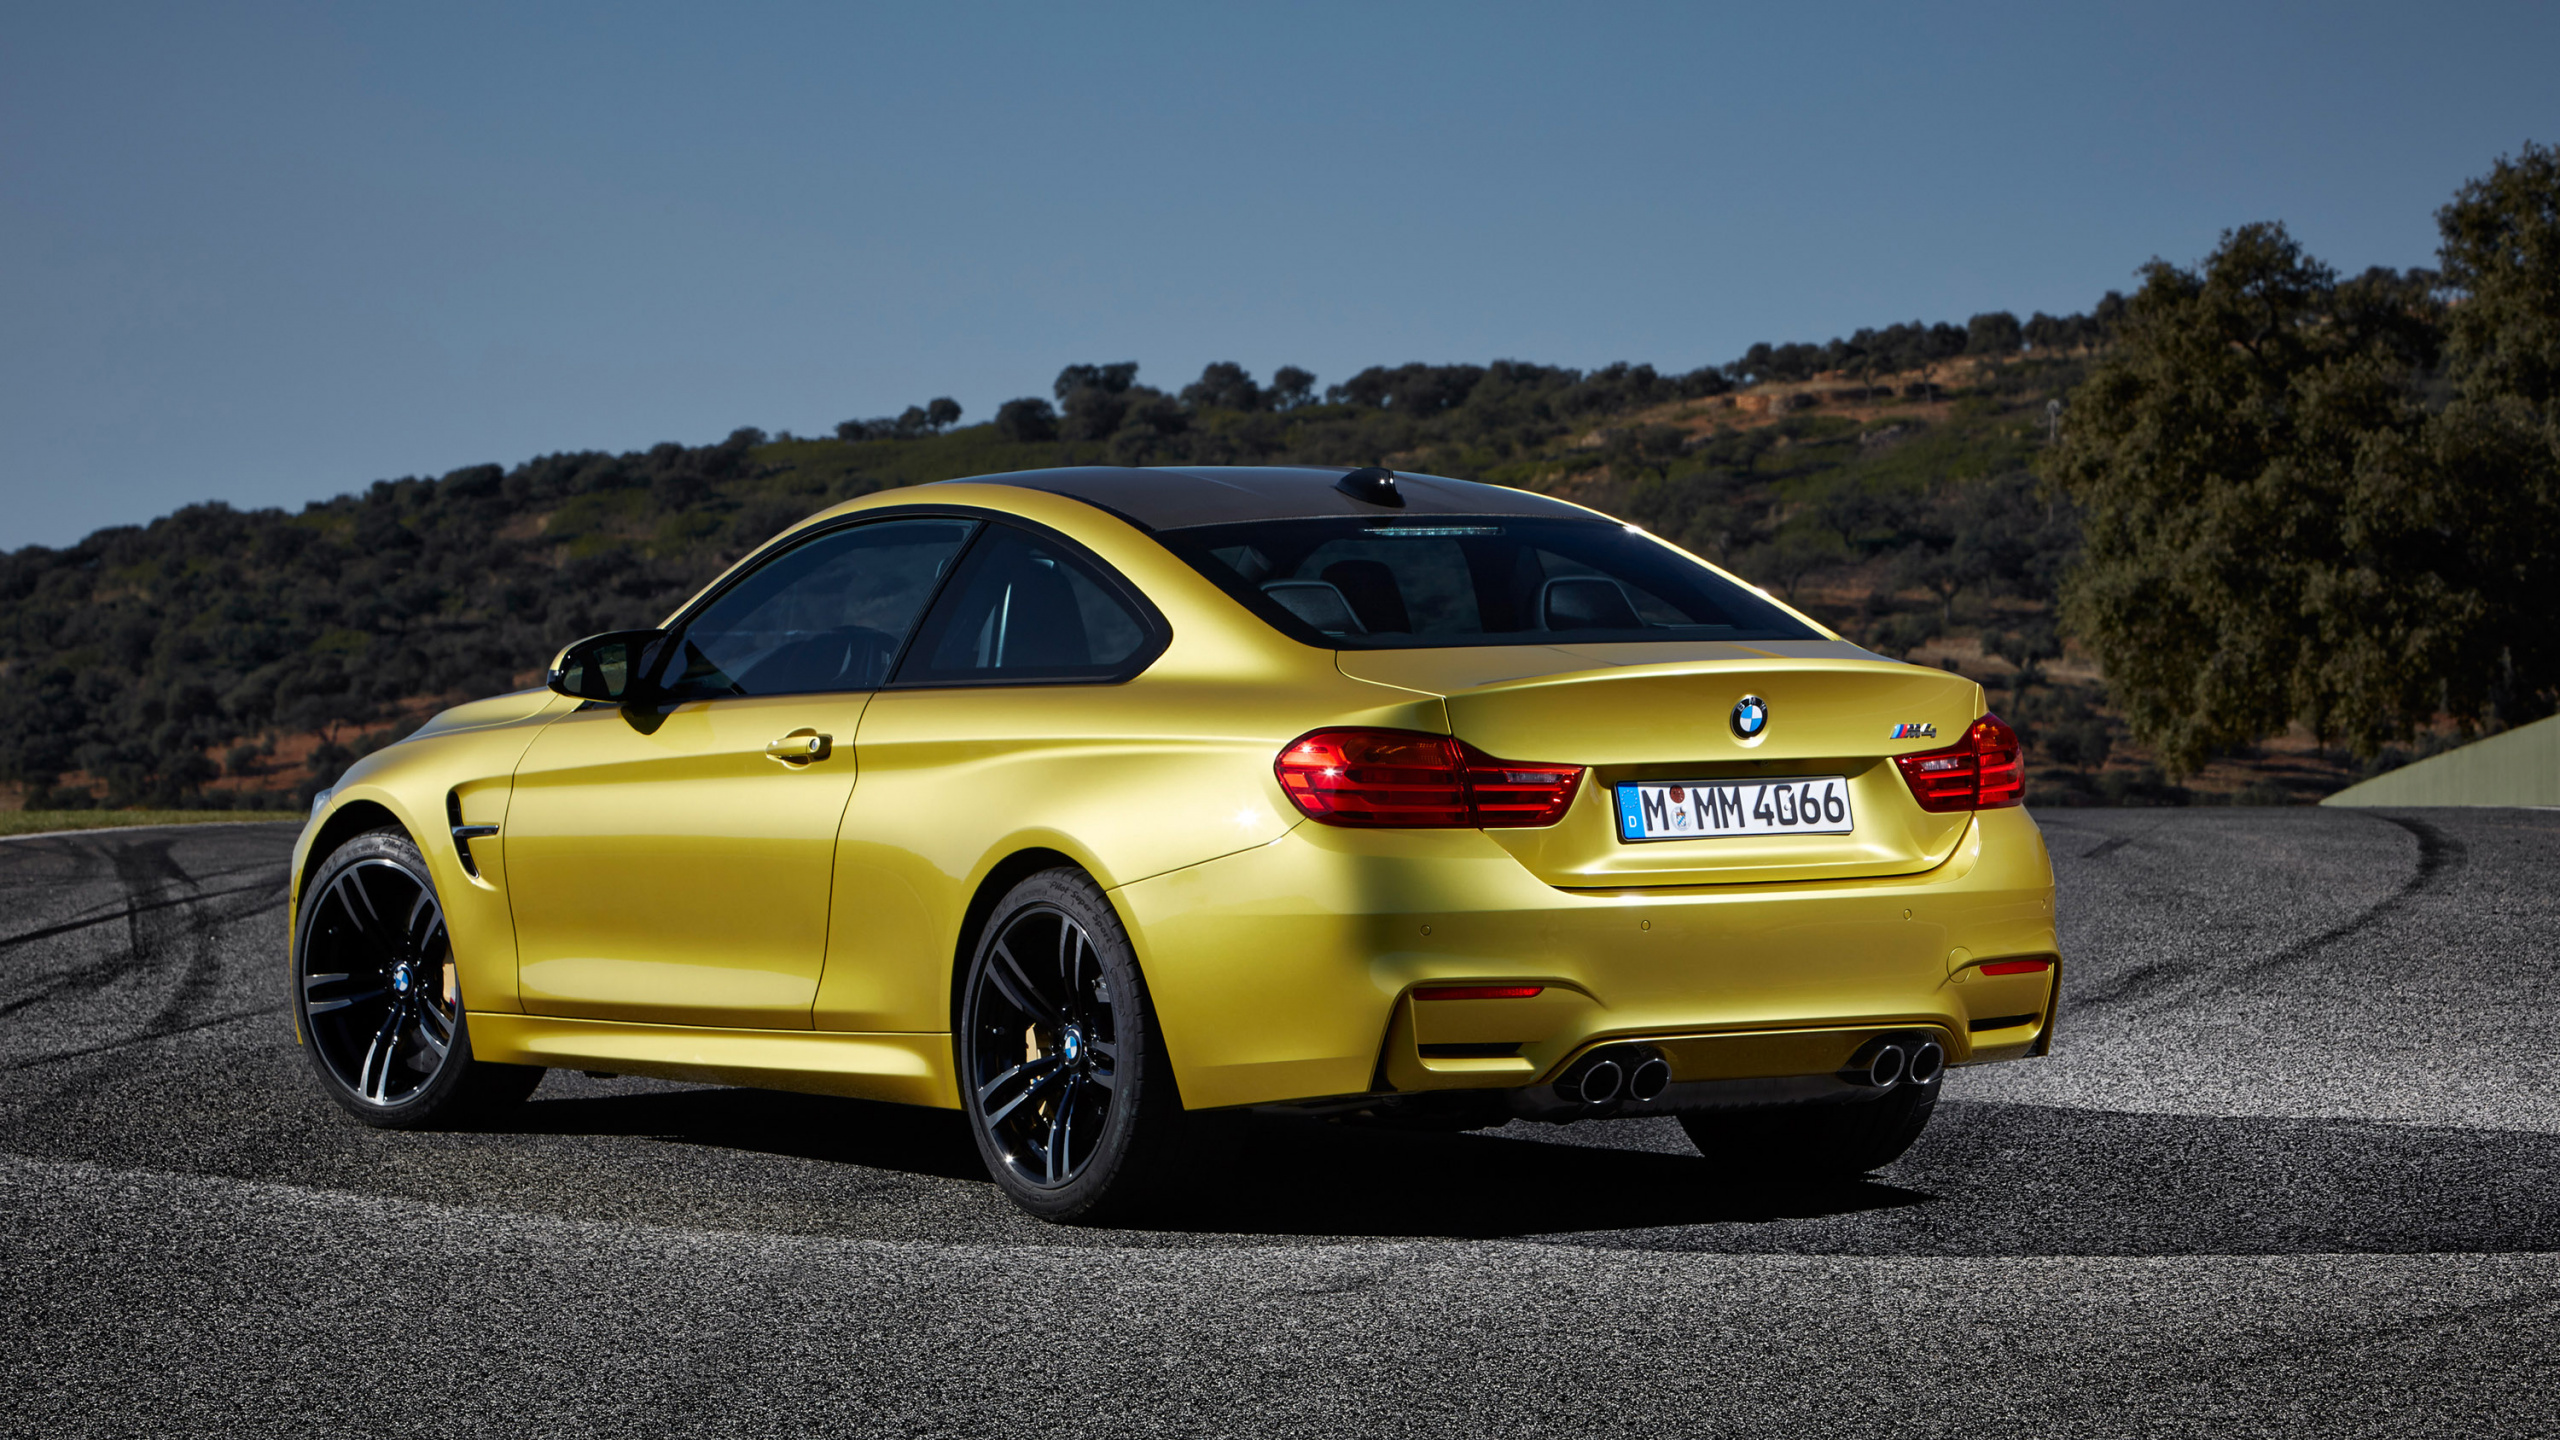 Yellow Bmw m 3 on Road During Daytime. Wallpaper in 2560x1440 Resolution